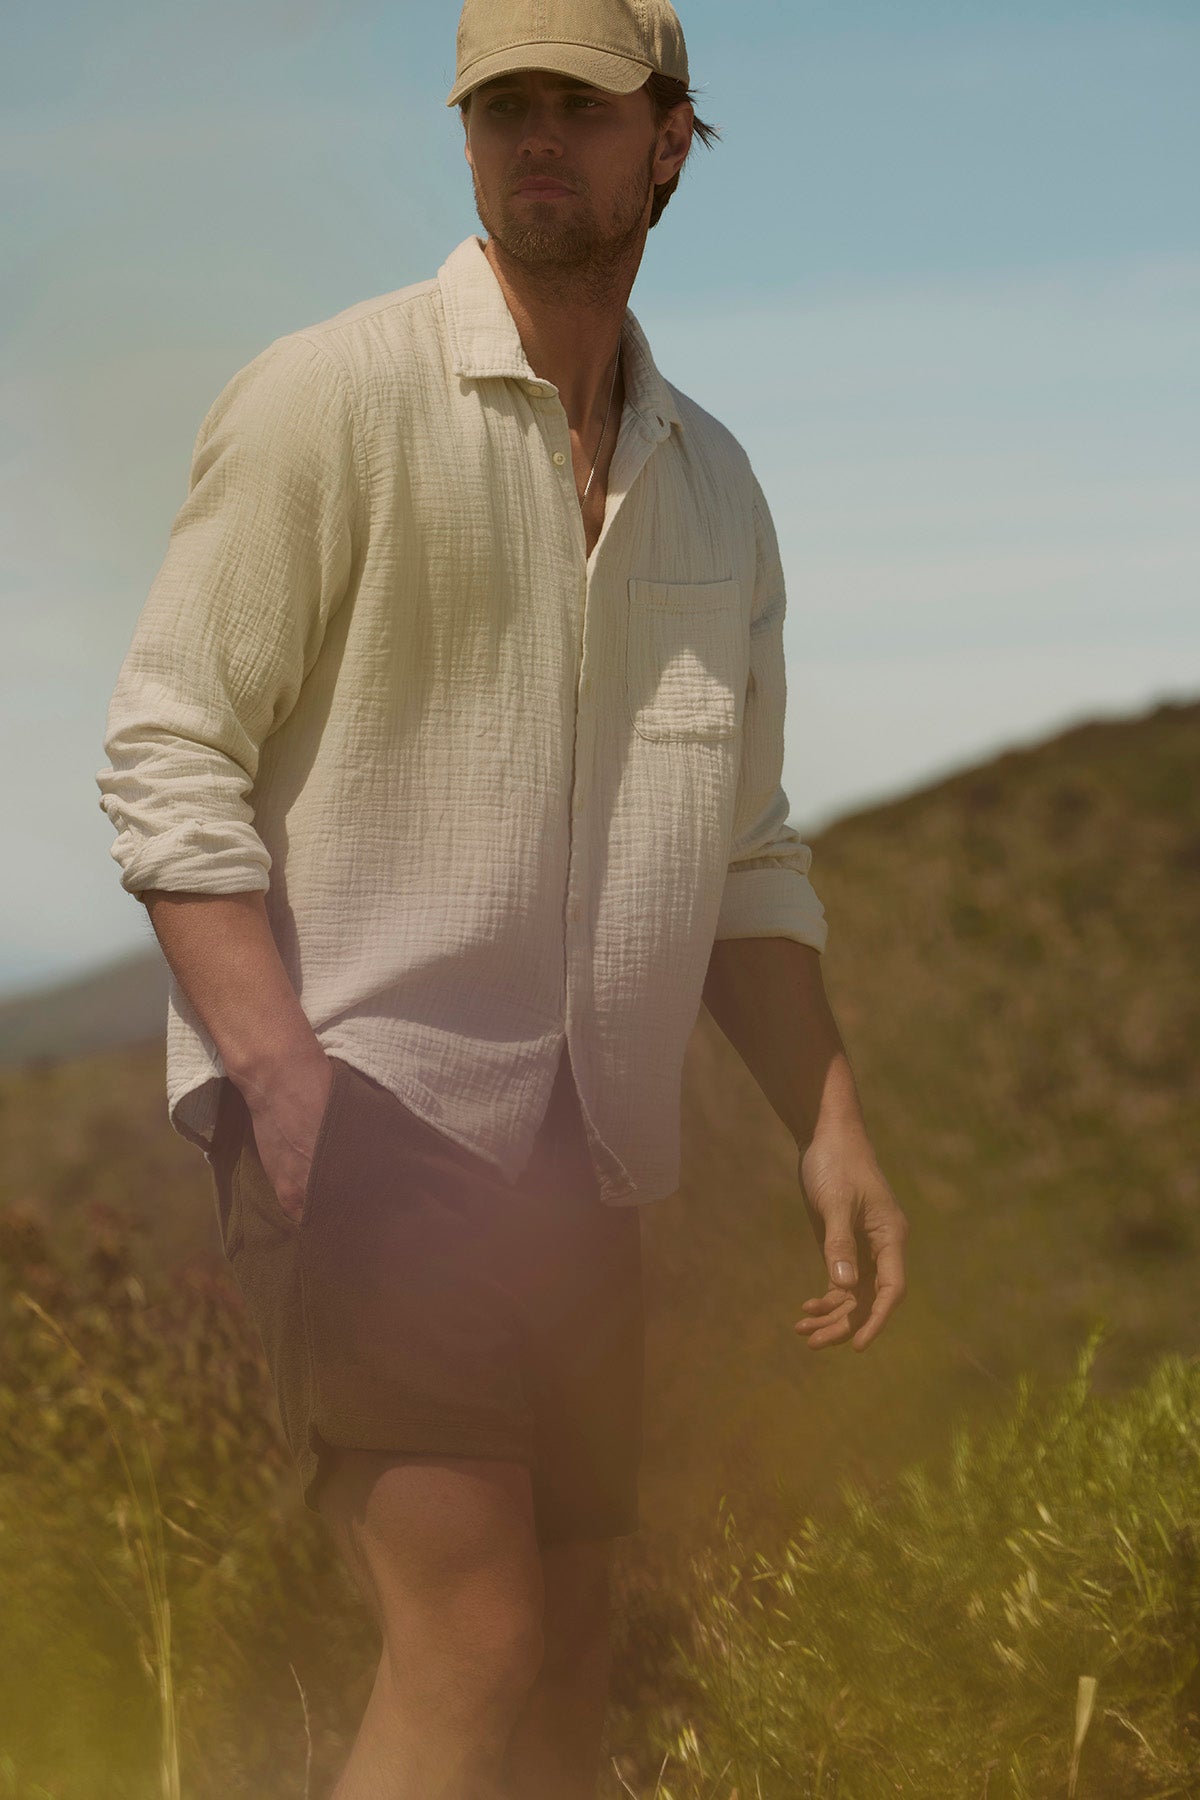 A man in an Elton Cotton Gauze button-up shirt and shorts stands in a sunny field, with a thoughtful expression and tousled hair, gazing into the distance.-36890786463937